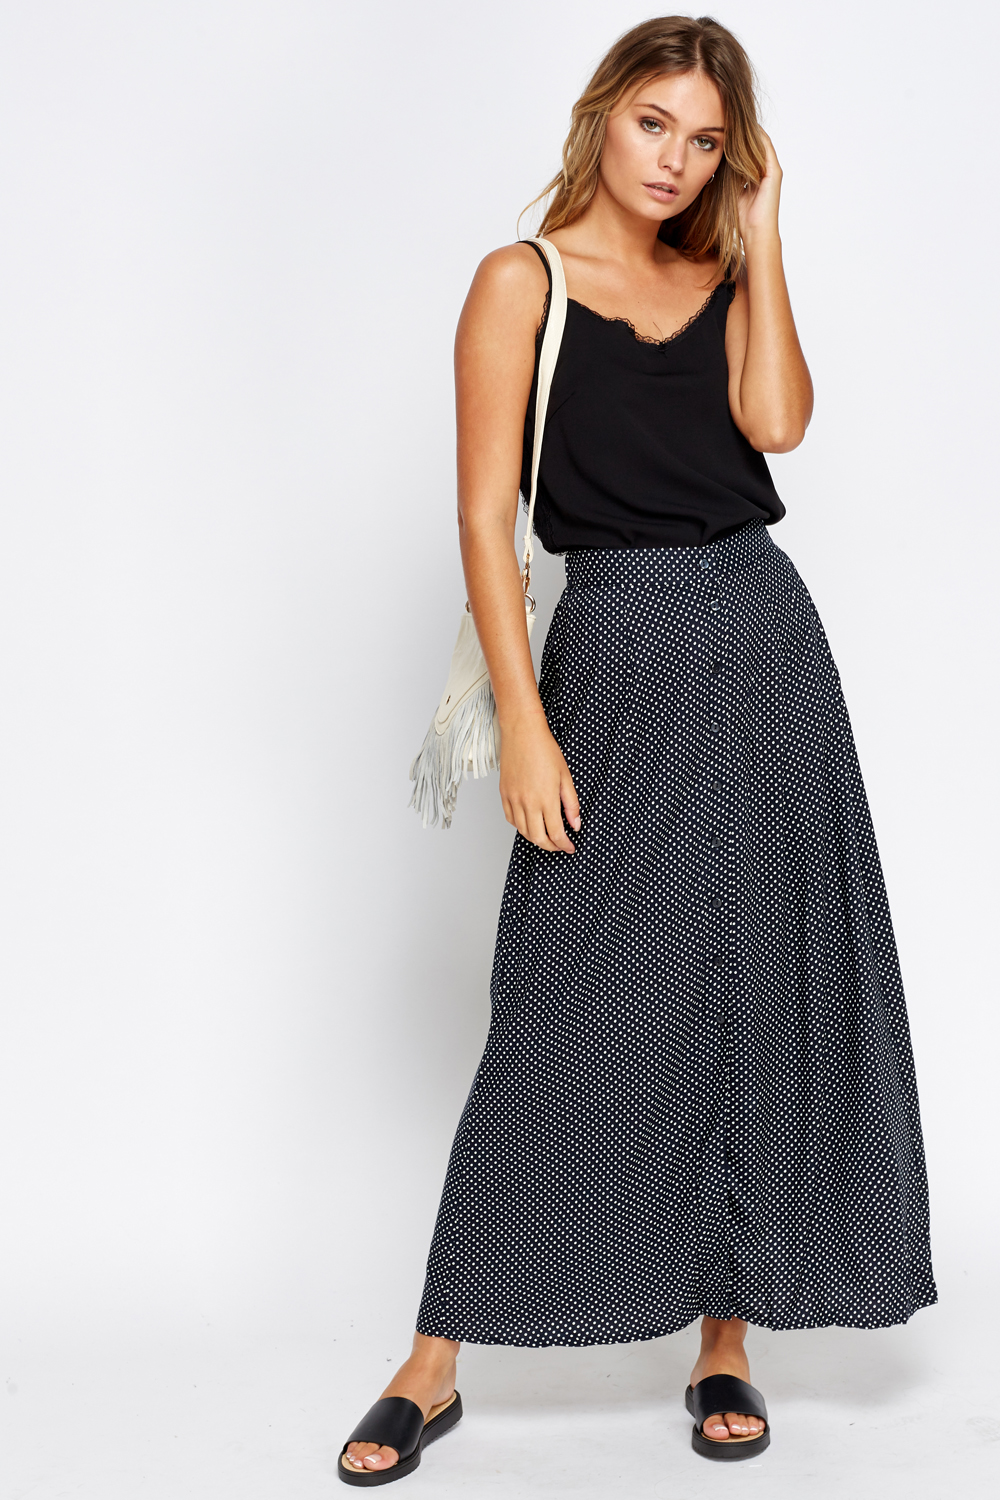 Midi Skirts | Buy cheap Midi Skirts for just £5 on ...